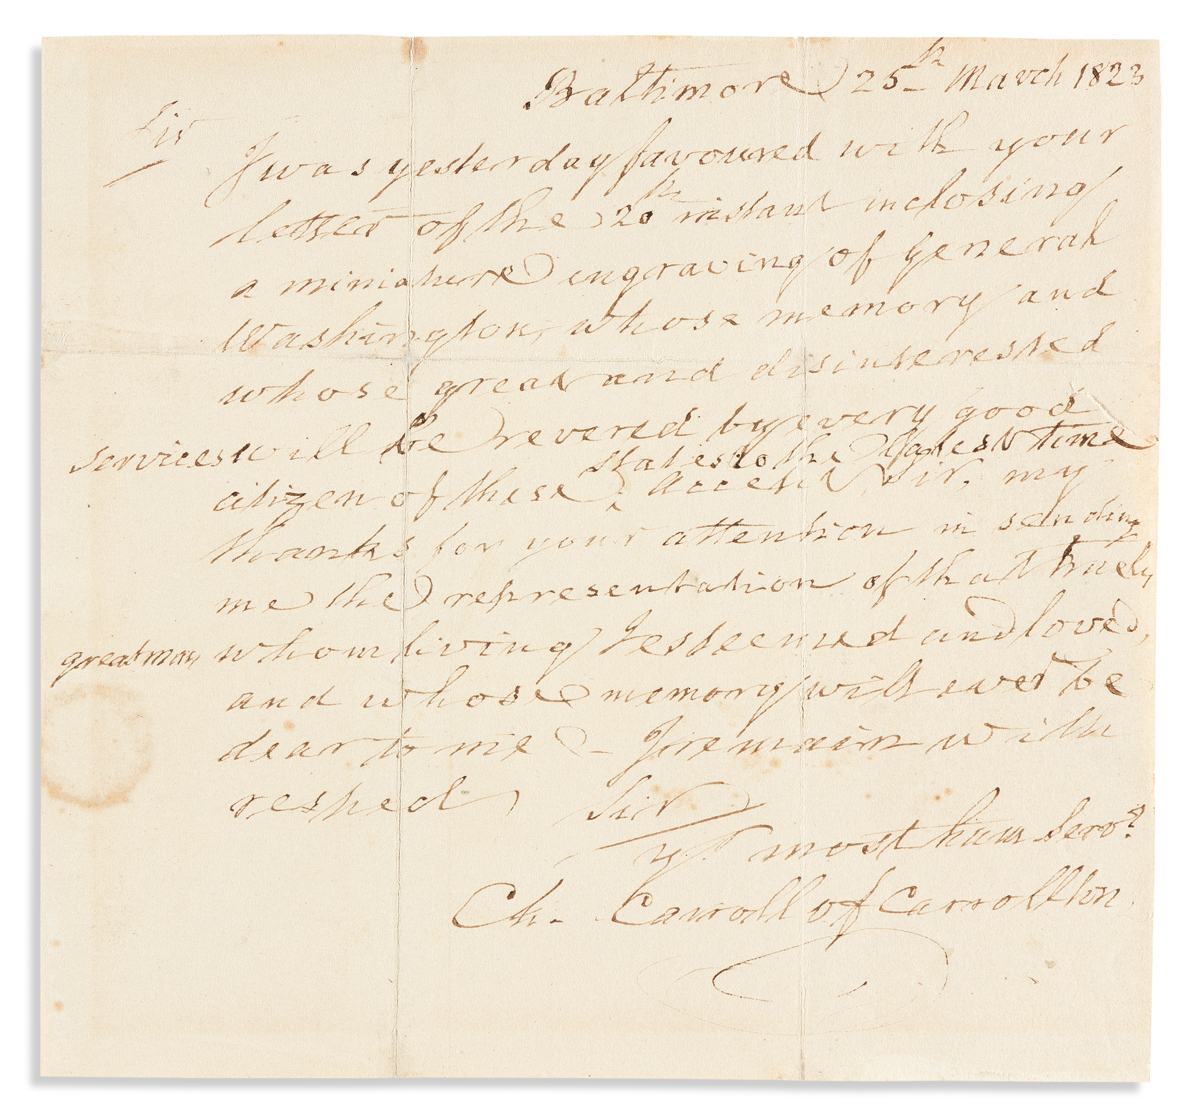 CARROLL, CHARLES. Autograph Letter Signed, Ch. Carroll of Carrollton, to Sir,